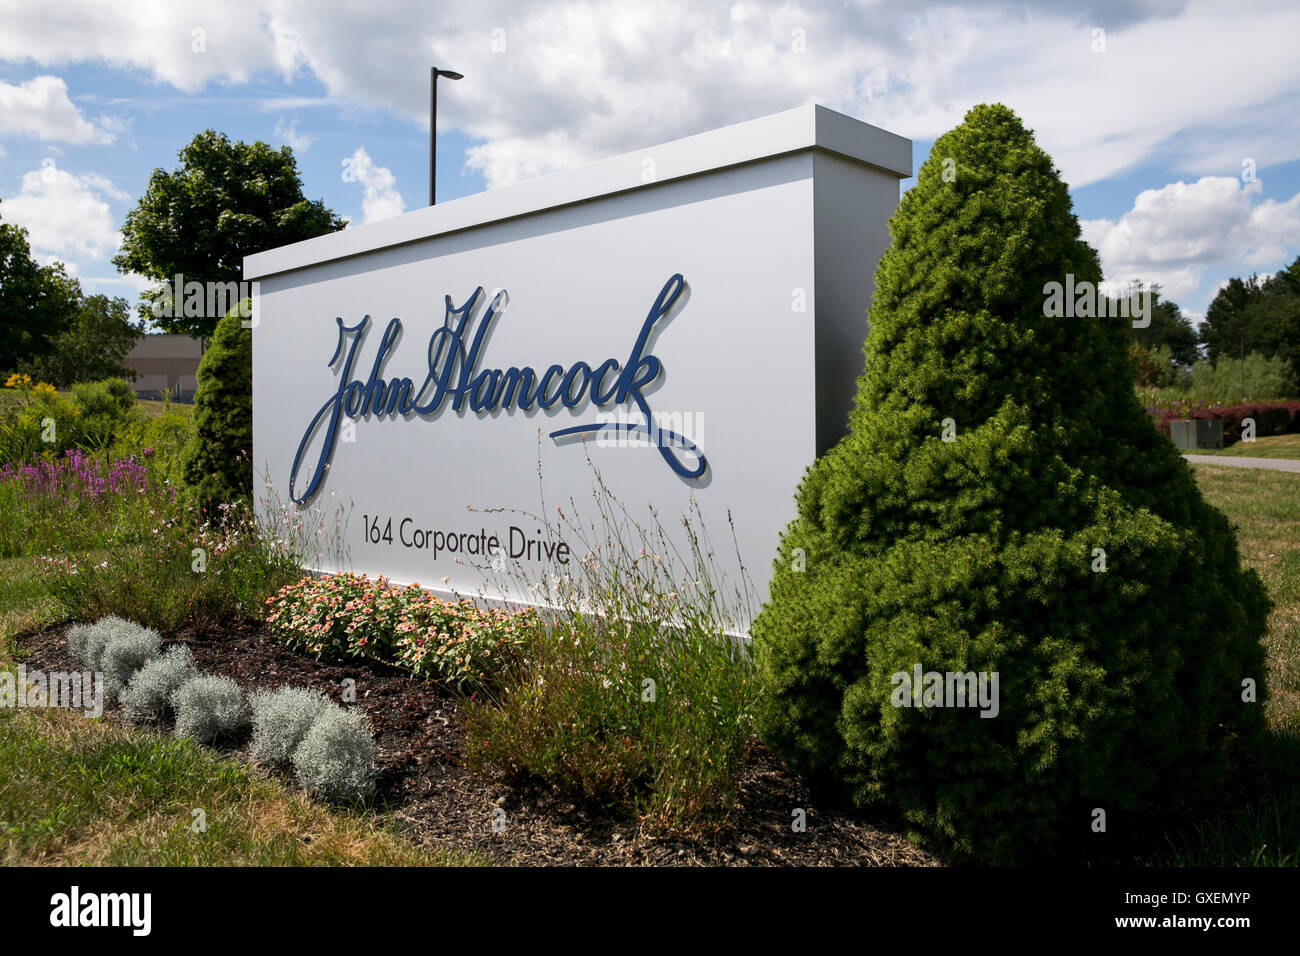 A logo sign outside of a facility occupied by John Hancock Financial in Portsmouth, New Hampshire on August 14, 2016. Stock Photo